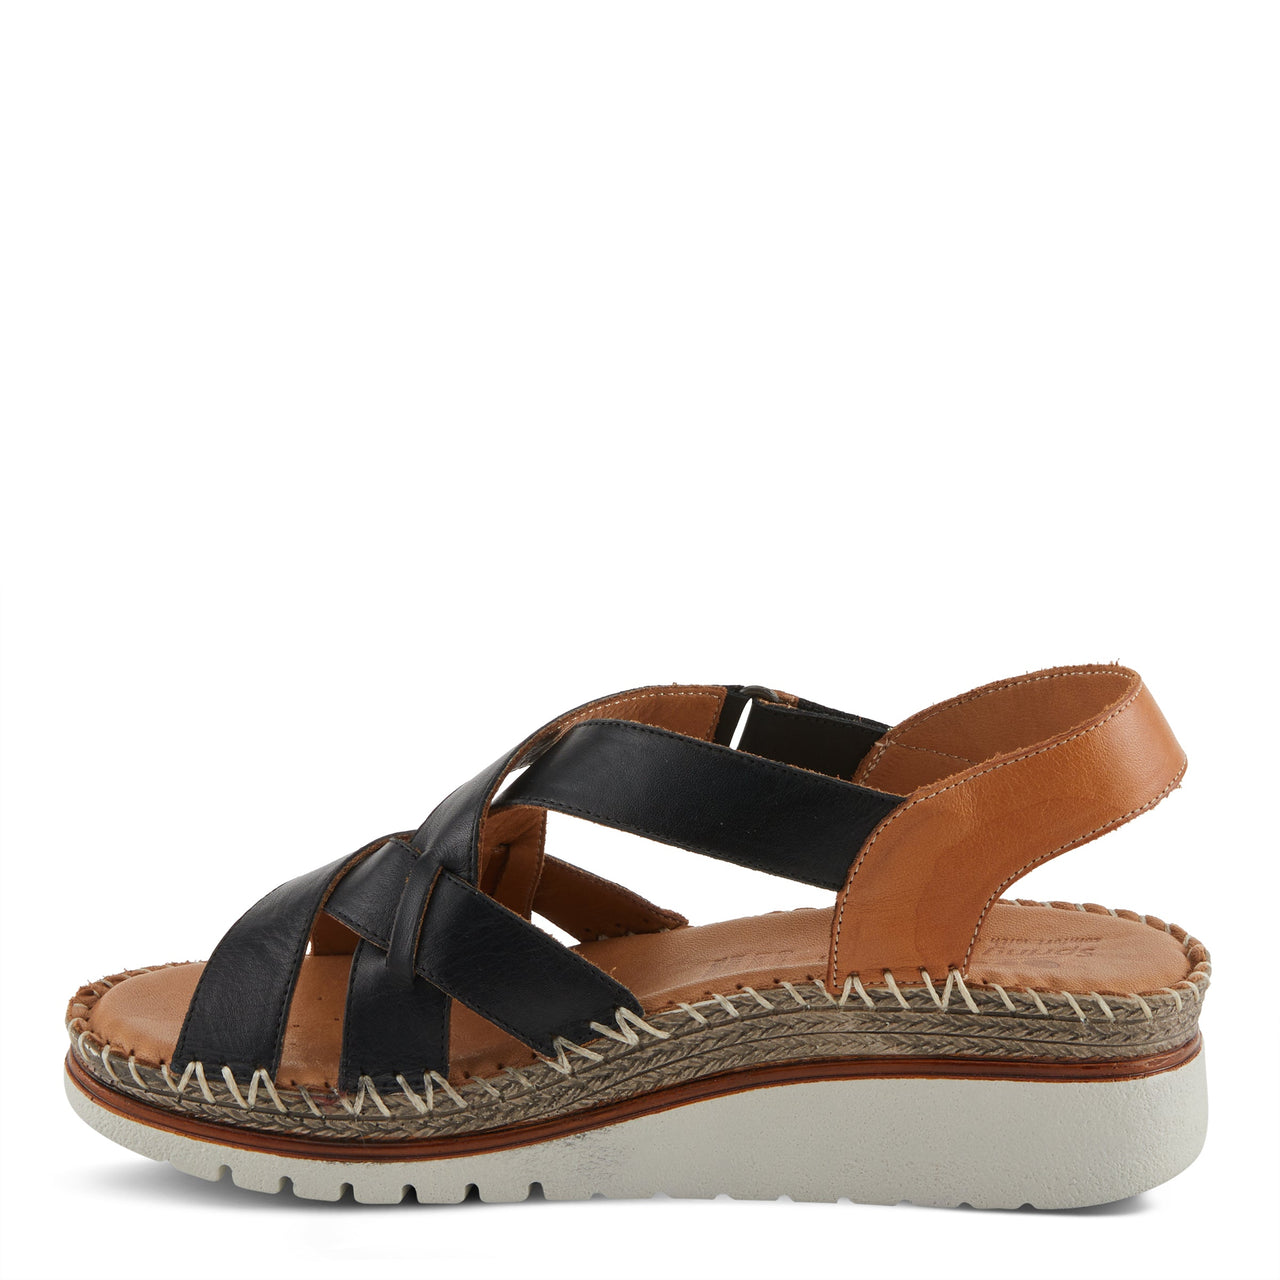 Spring Step Migula Sandals in cognac with cushioned footbed and slip-on design